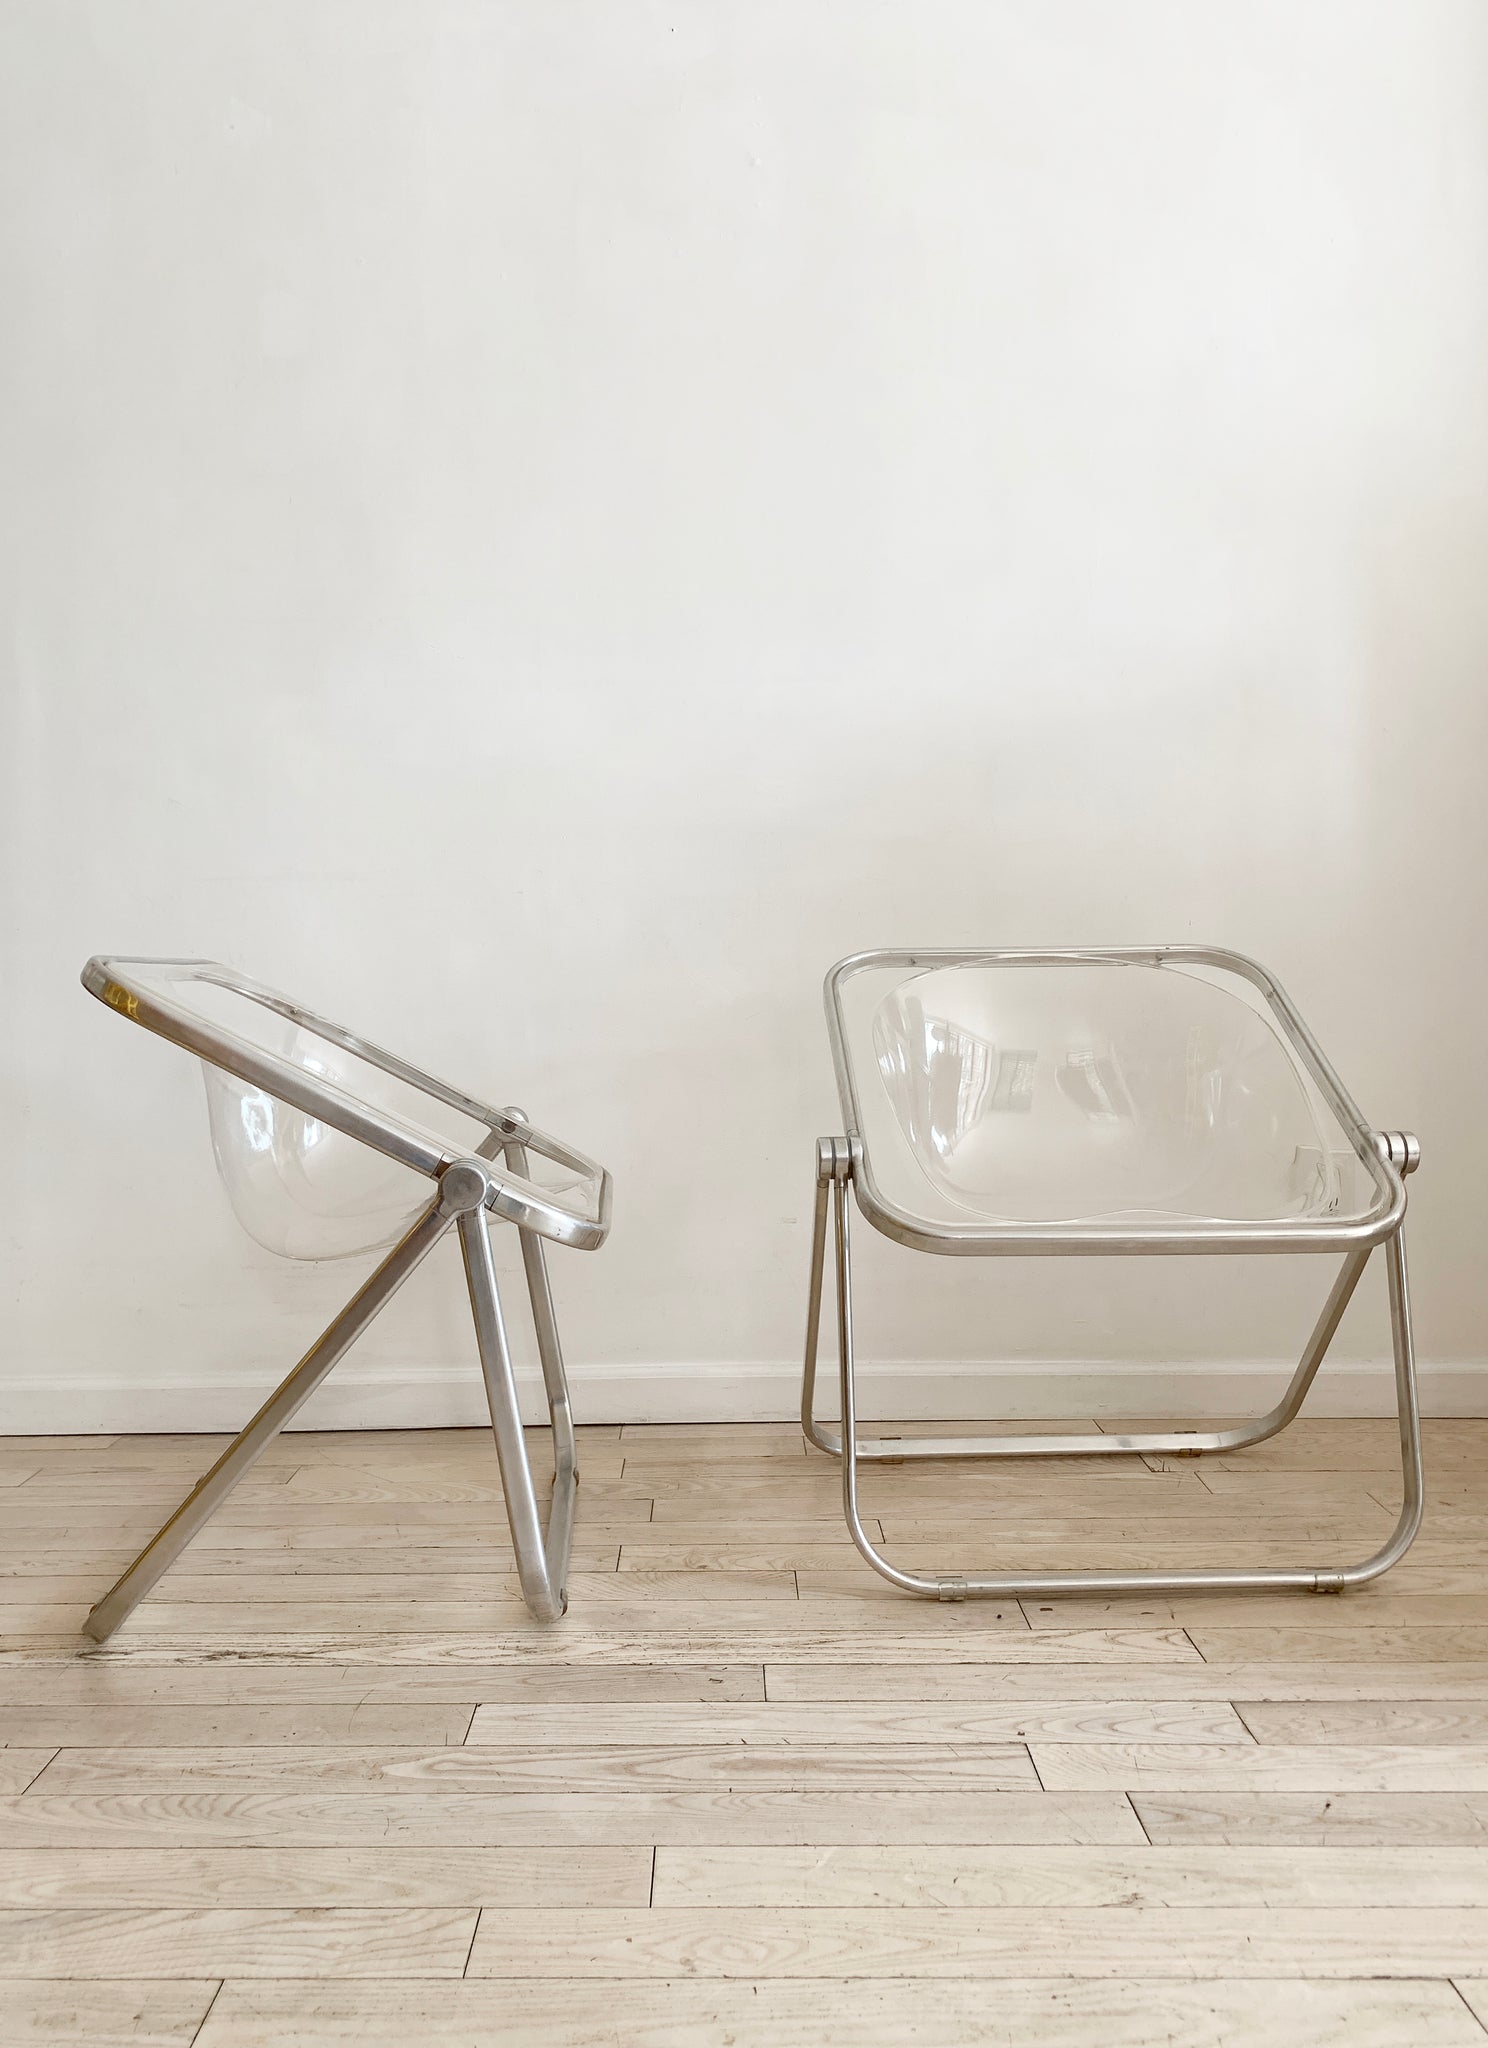 1970s "Plona" Chair by Giancarlo Piretti for Castelli, Italy